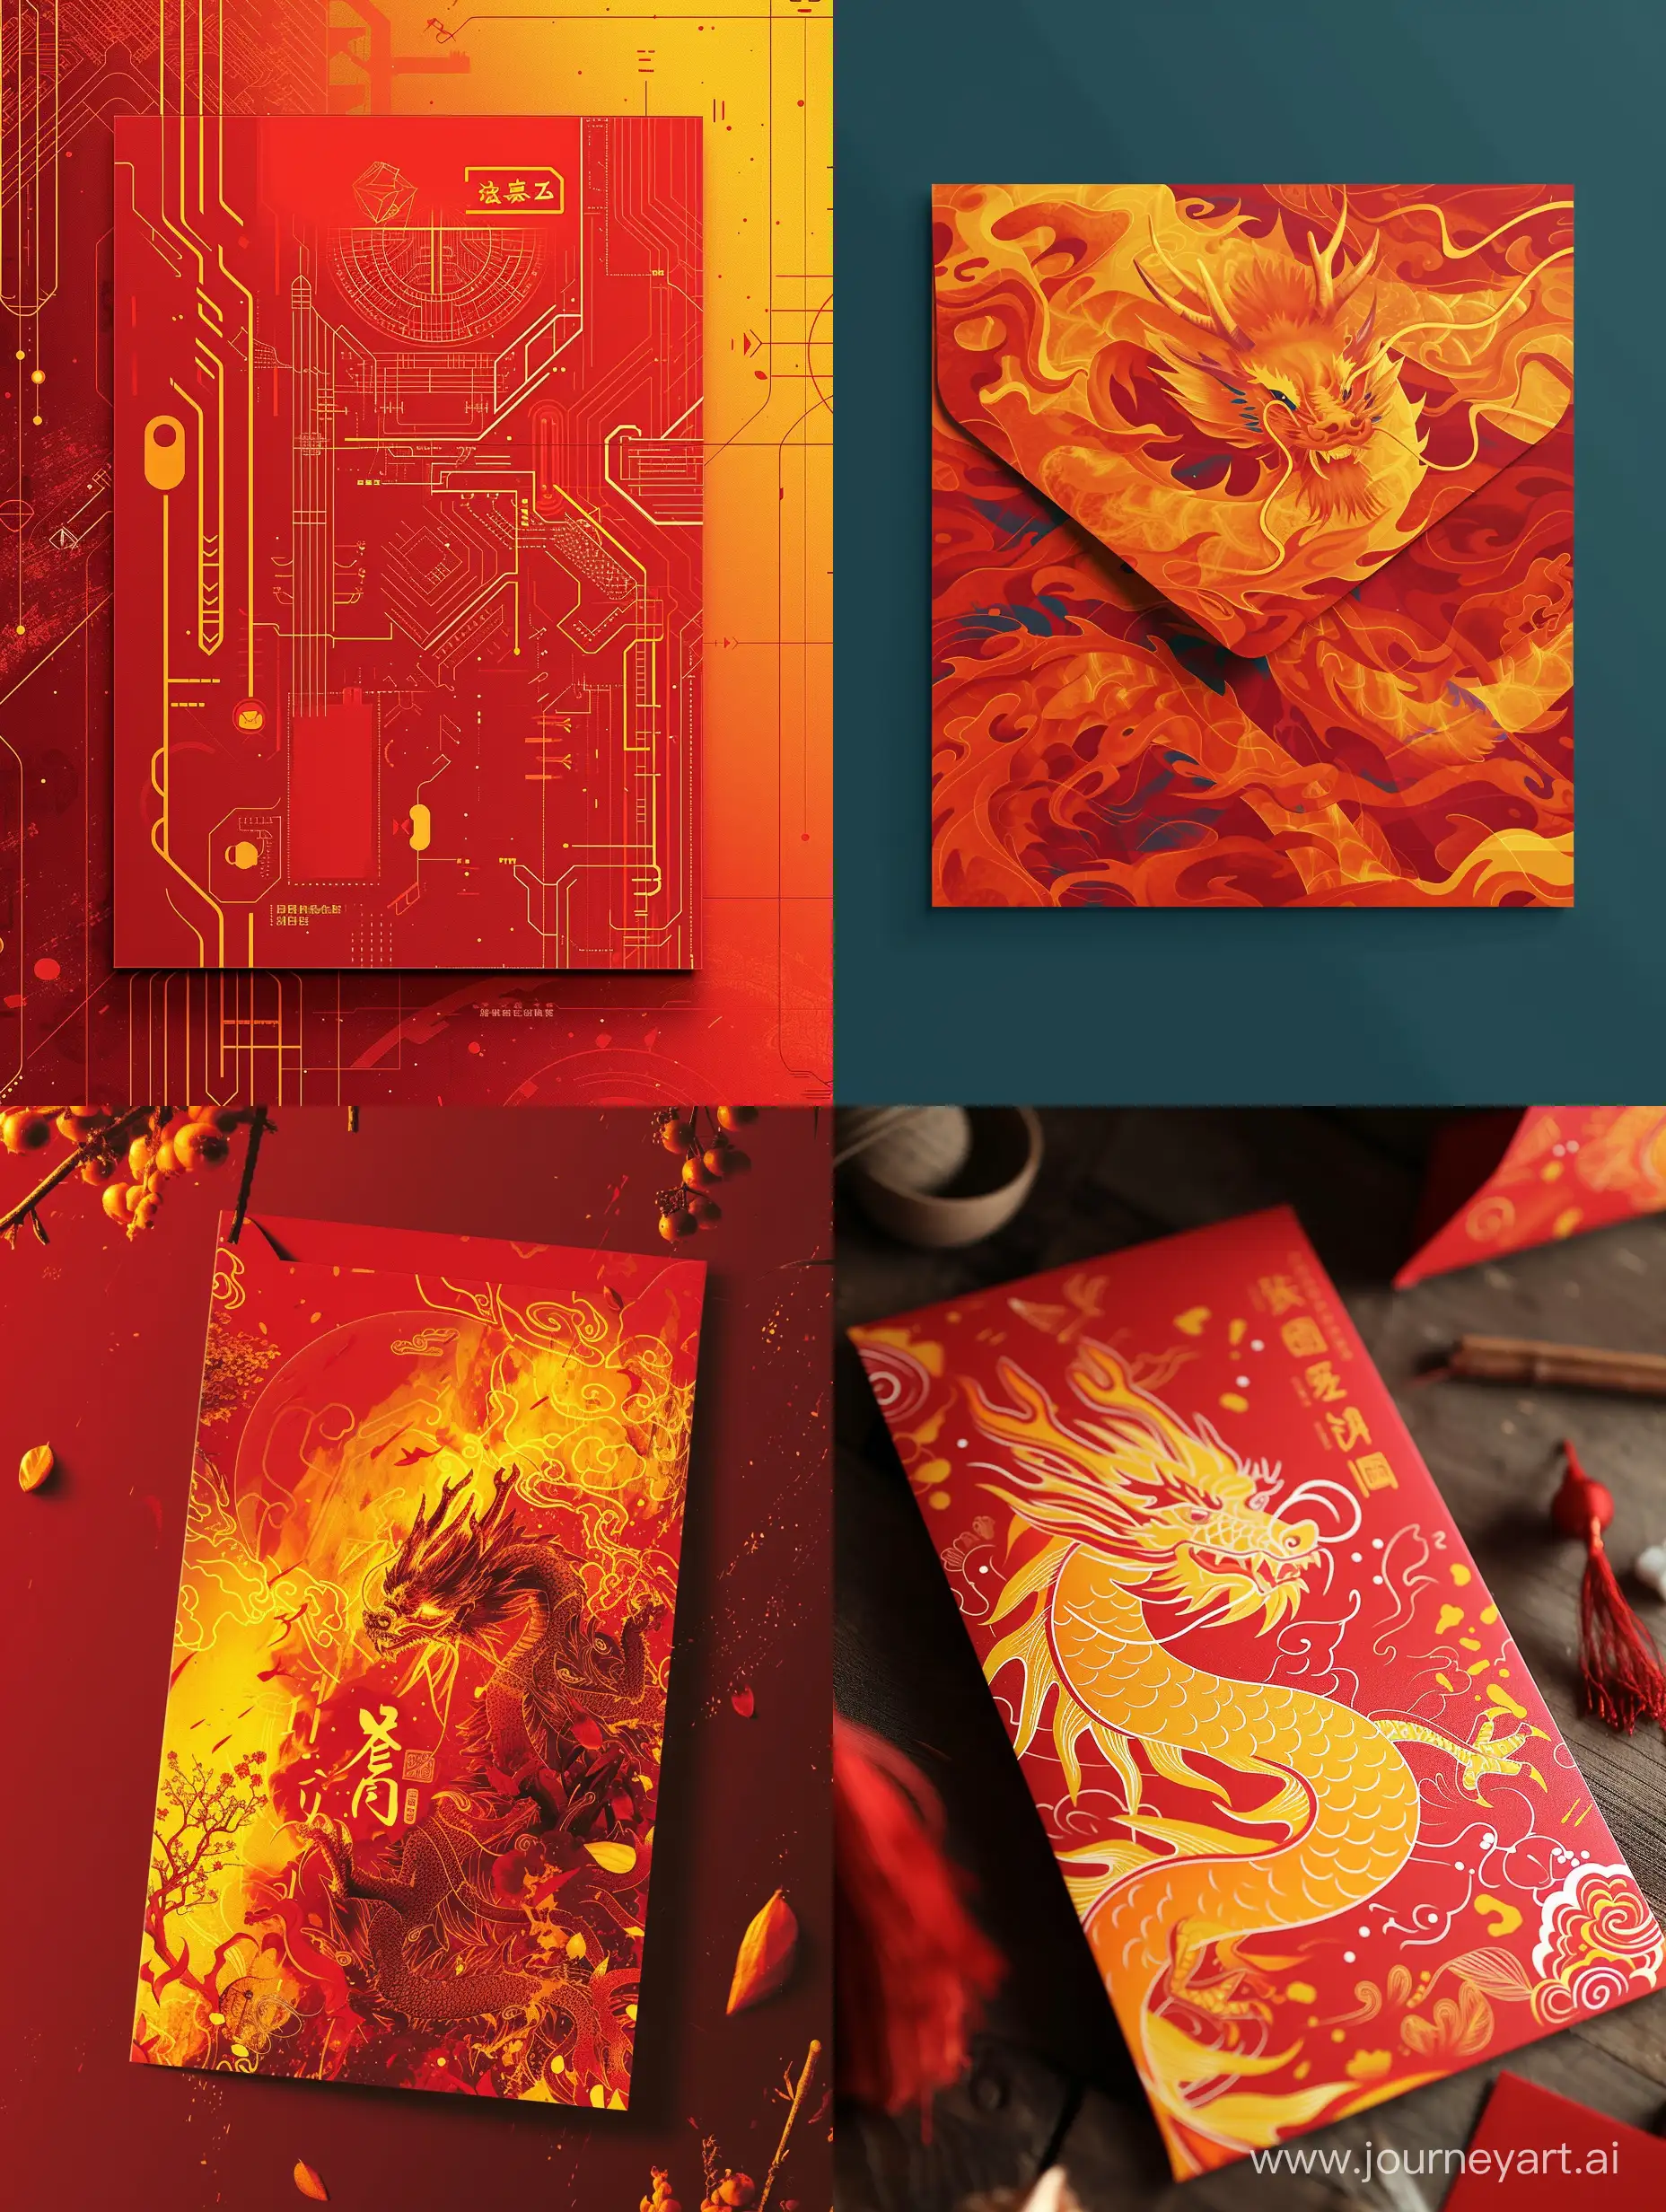 Vibrant-Year-of-the-Dragon-Red-Envelope-with-Ox-Element-and-Technological-Vibes